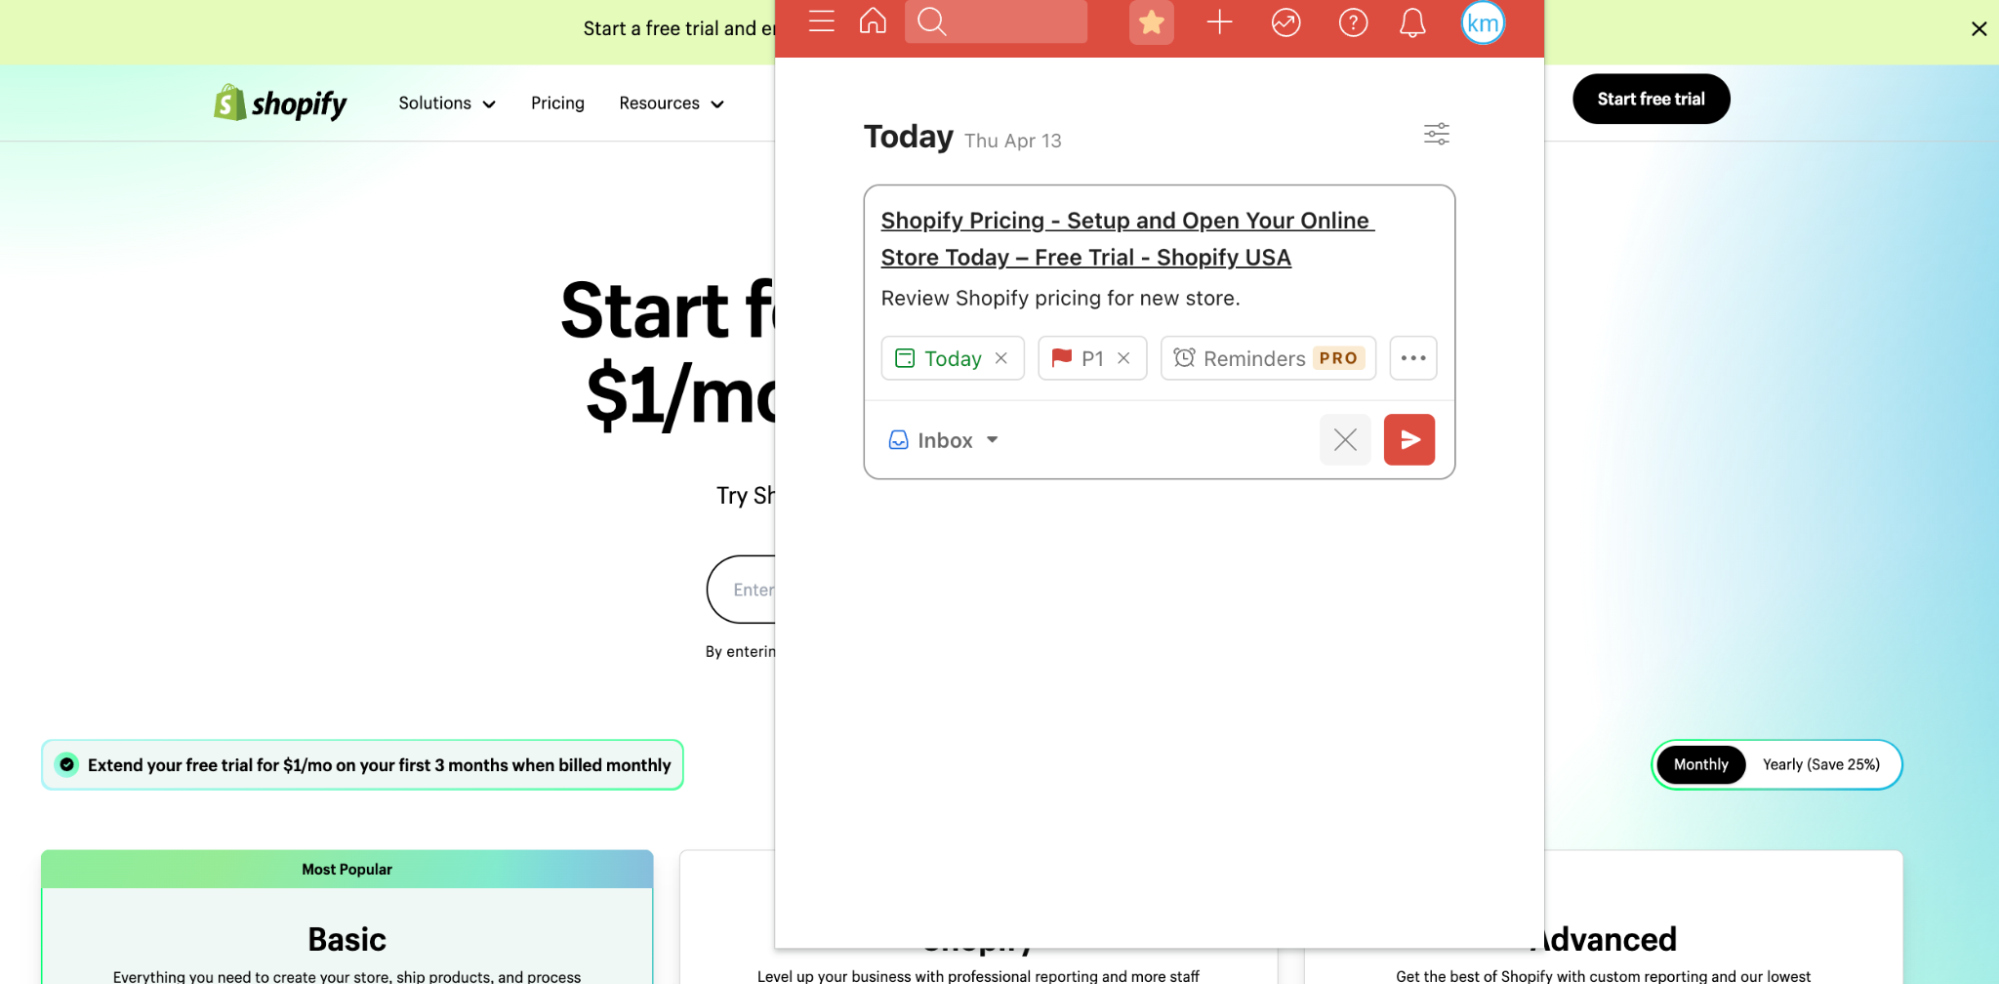 To-do list prioritizing Shopify pricing review, with pricing plan details on the Shopify site.